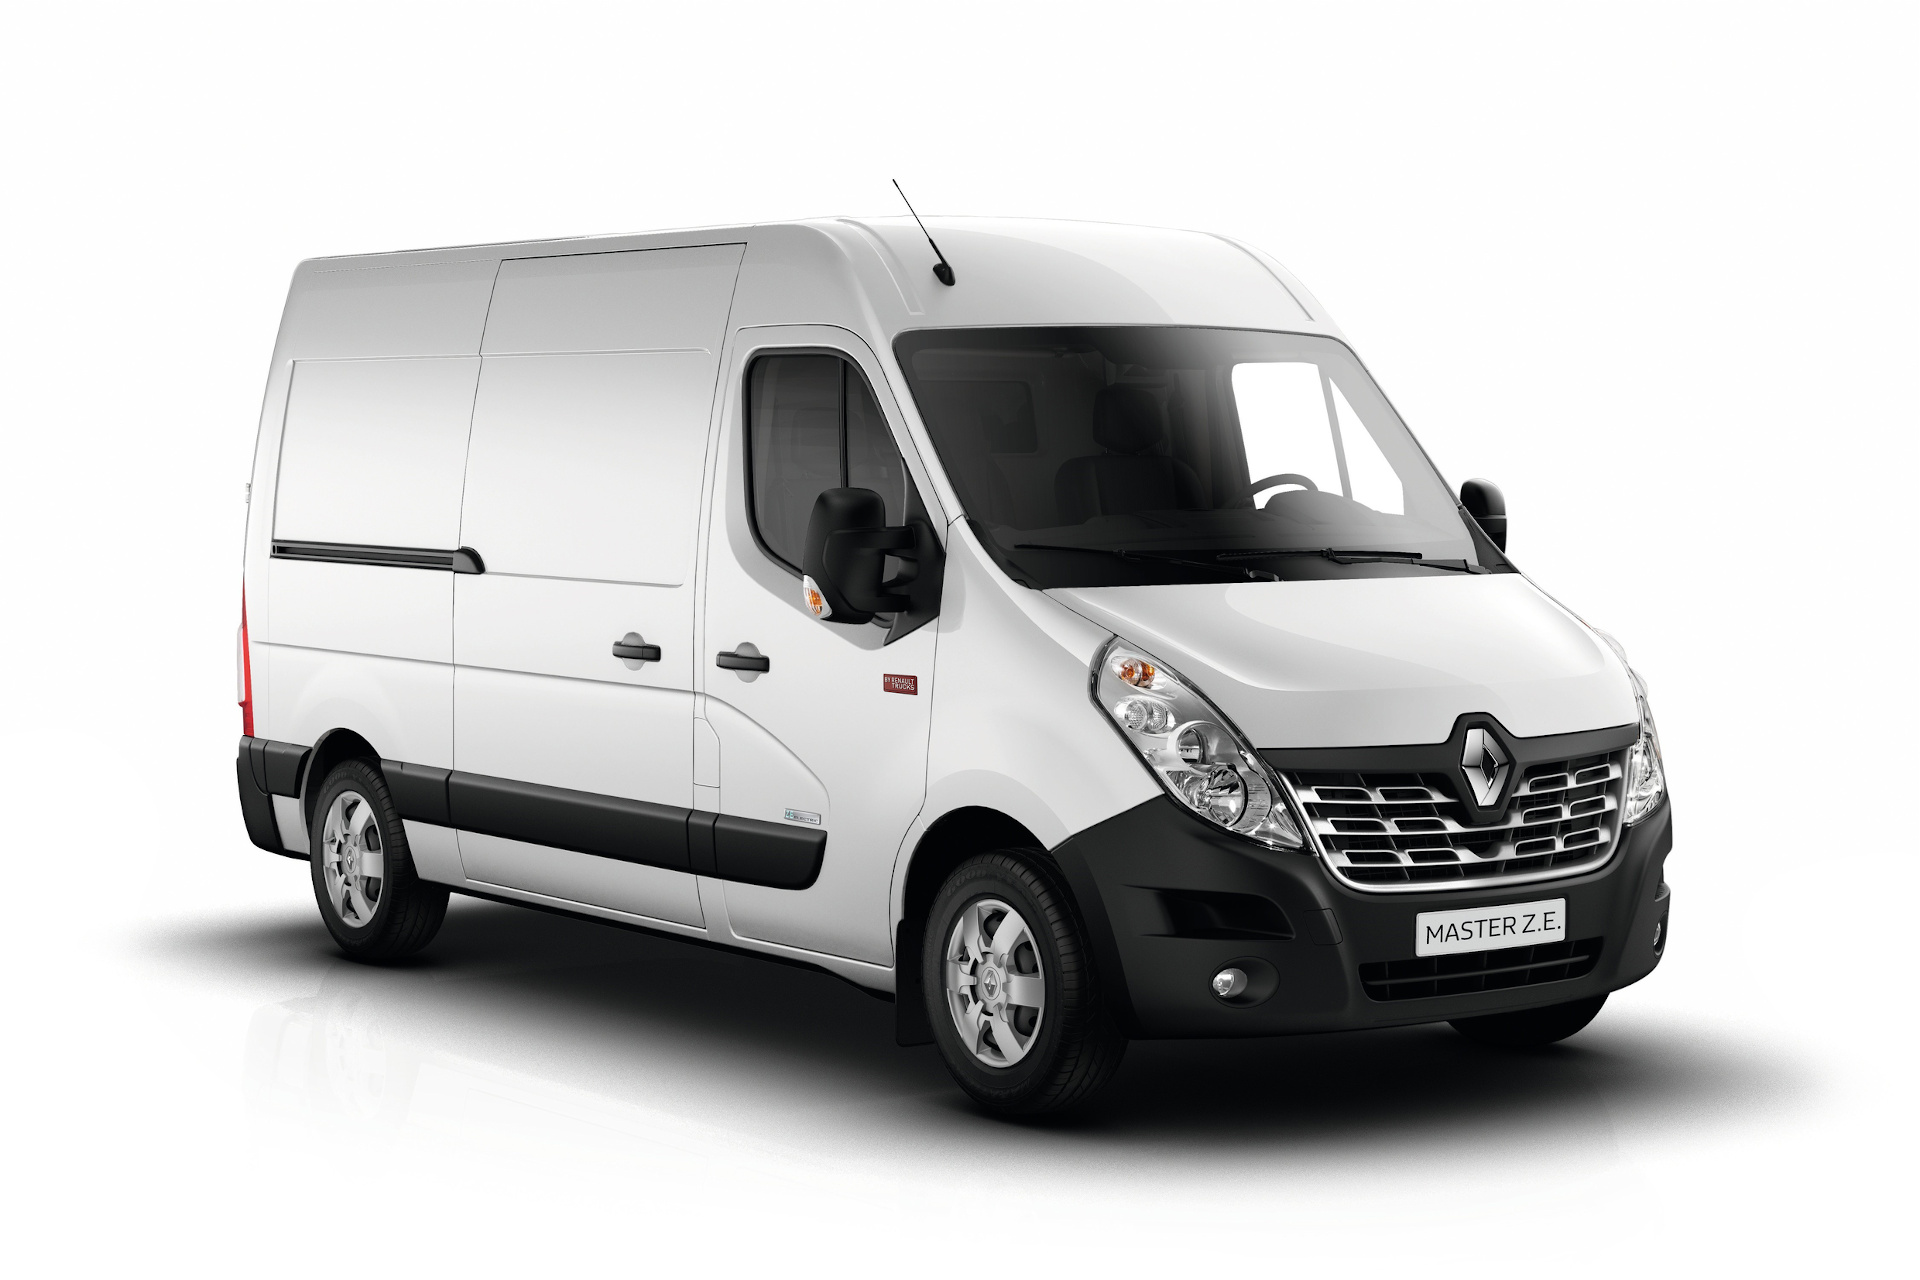 RENAULT TRUCKS IS LAUNCHING THE RENAULT MASTER Z.E., ITS ALL